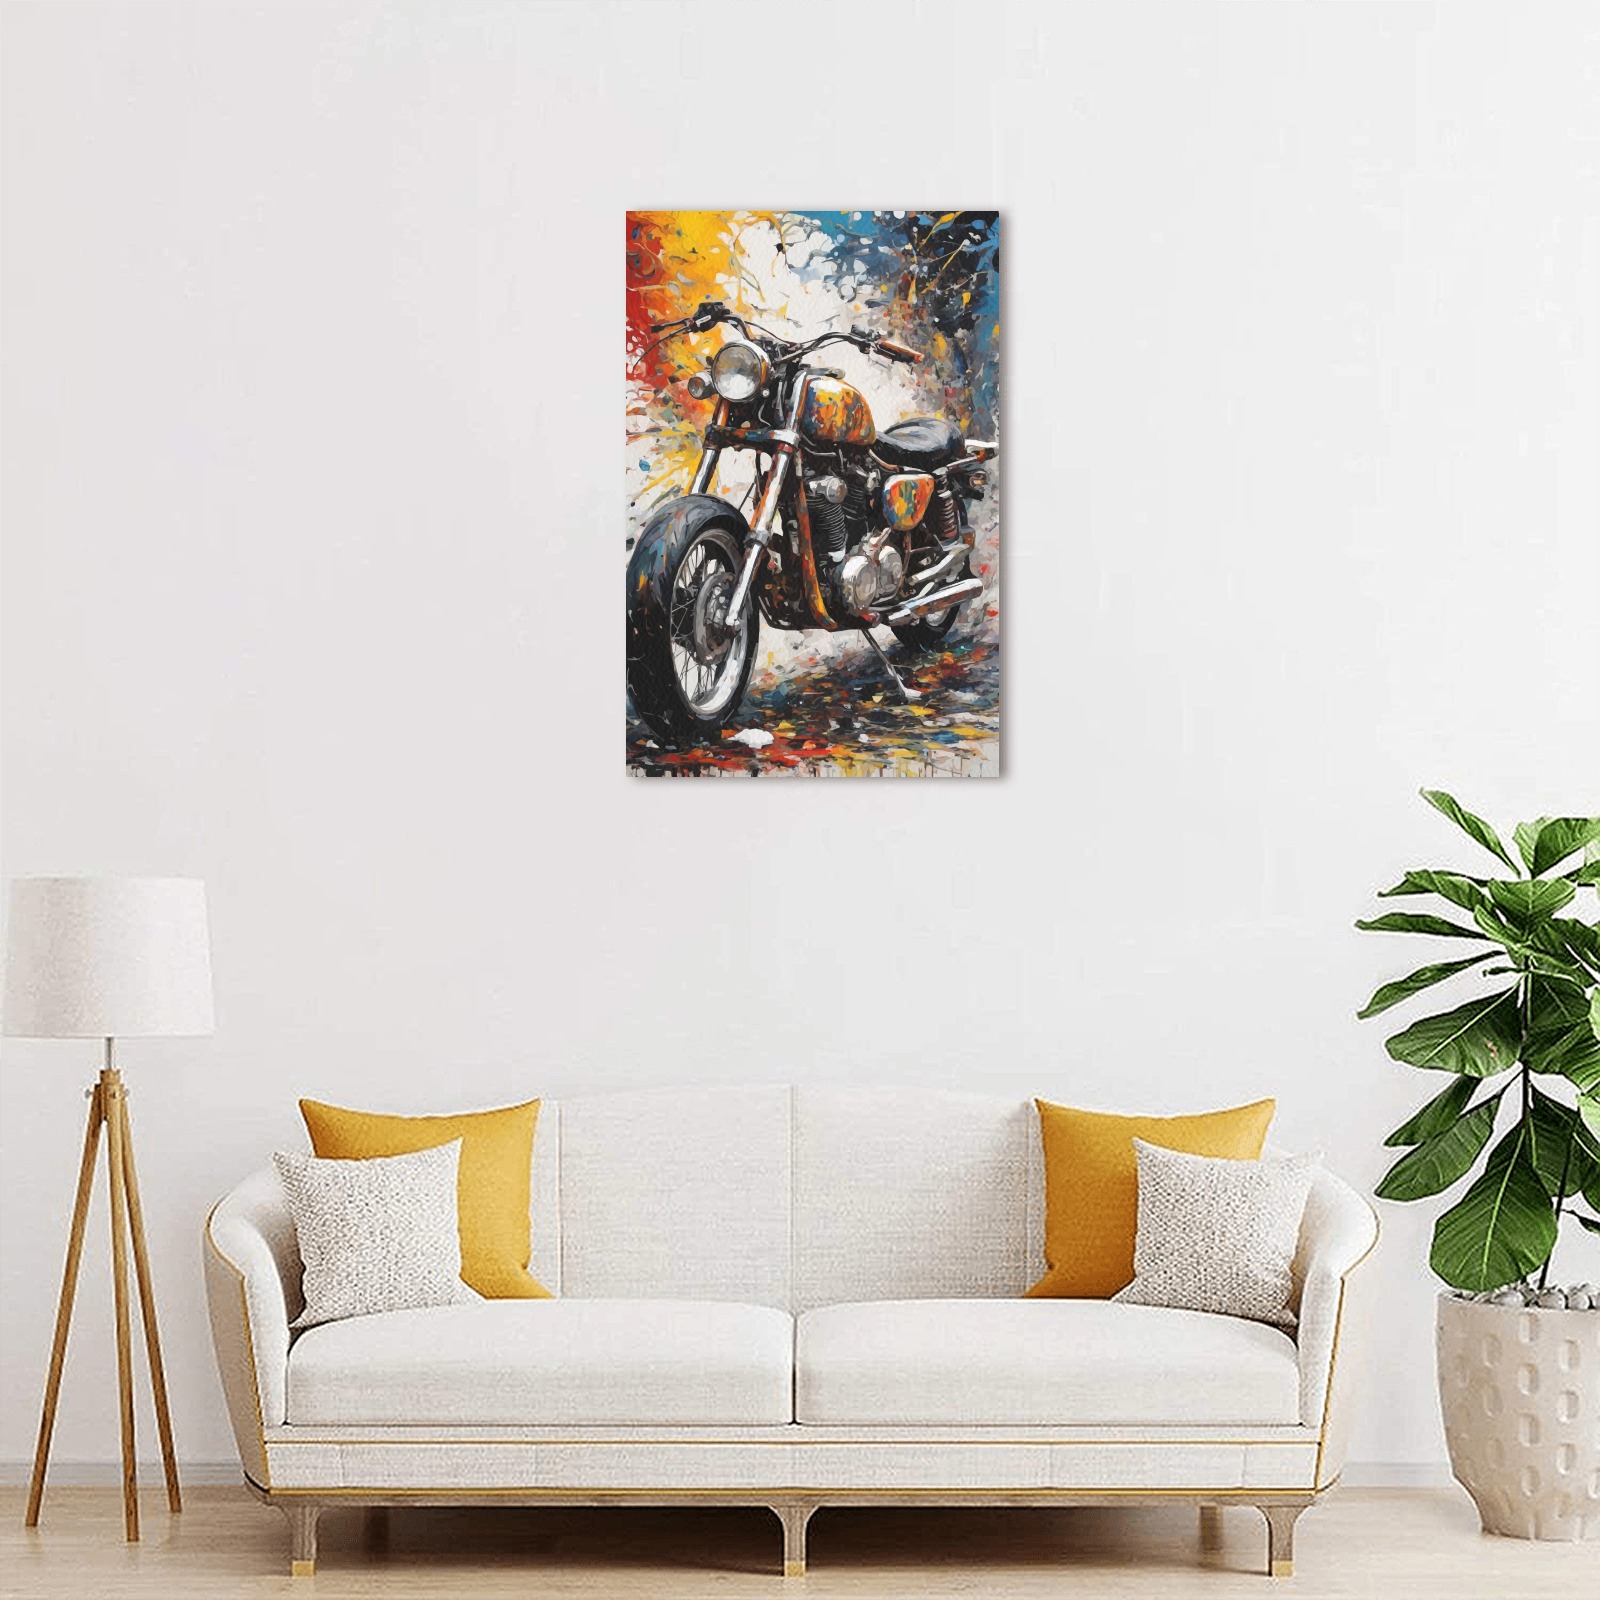 Old motorcycle and artistic colors around it art Upgraded Canvas Print 12"x18"